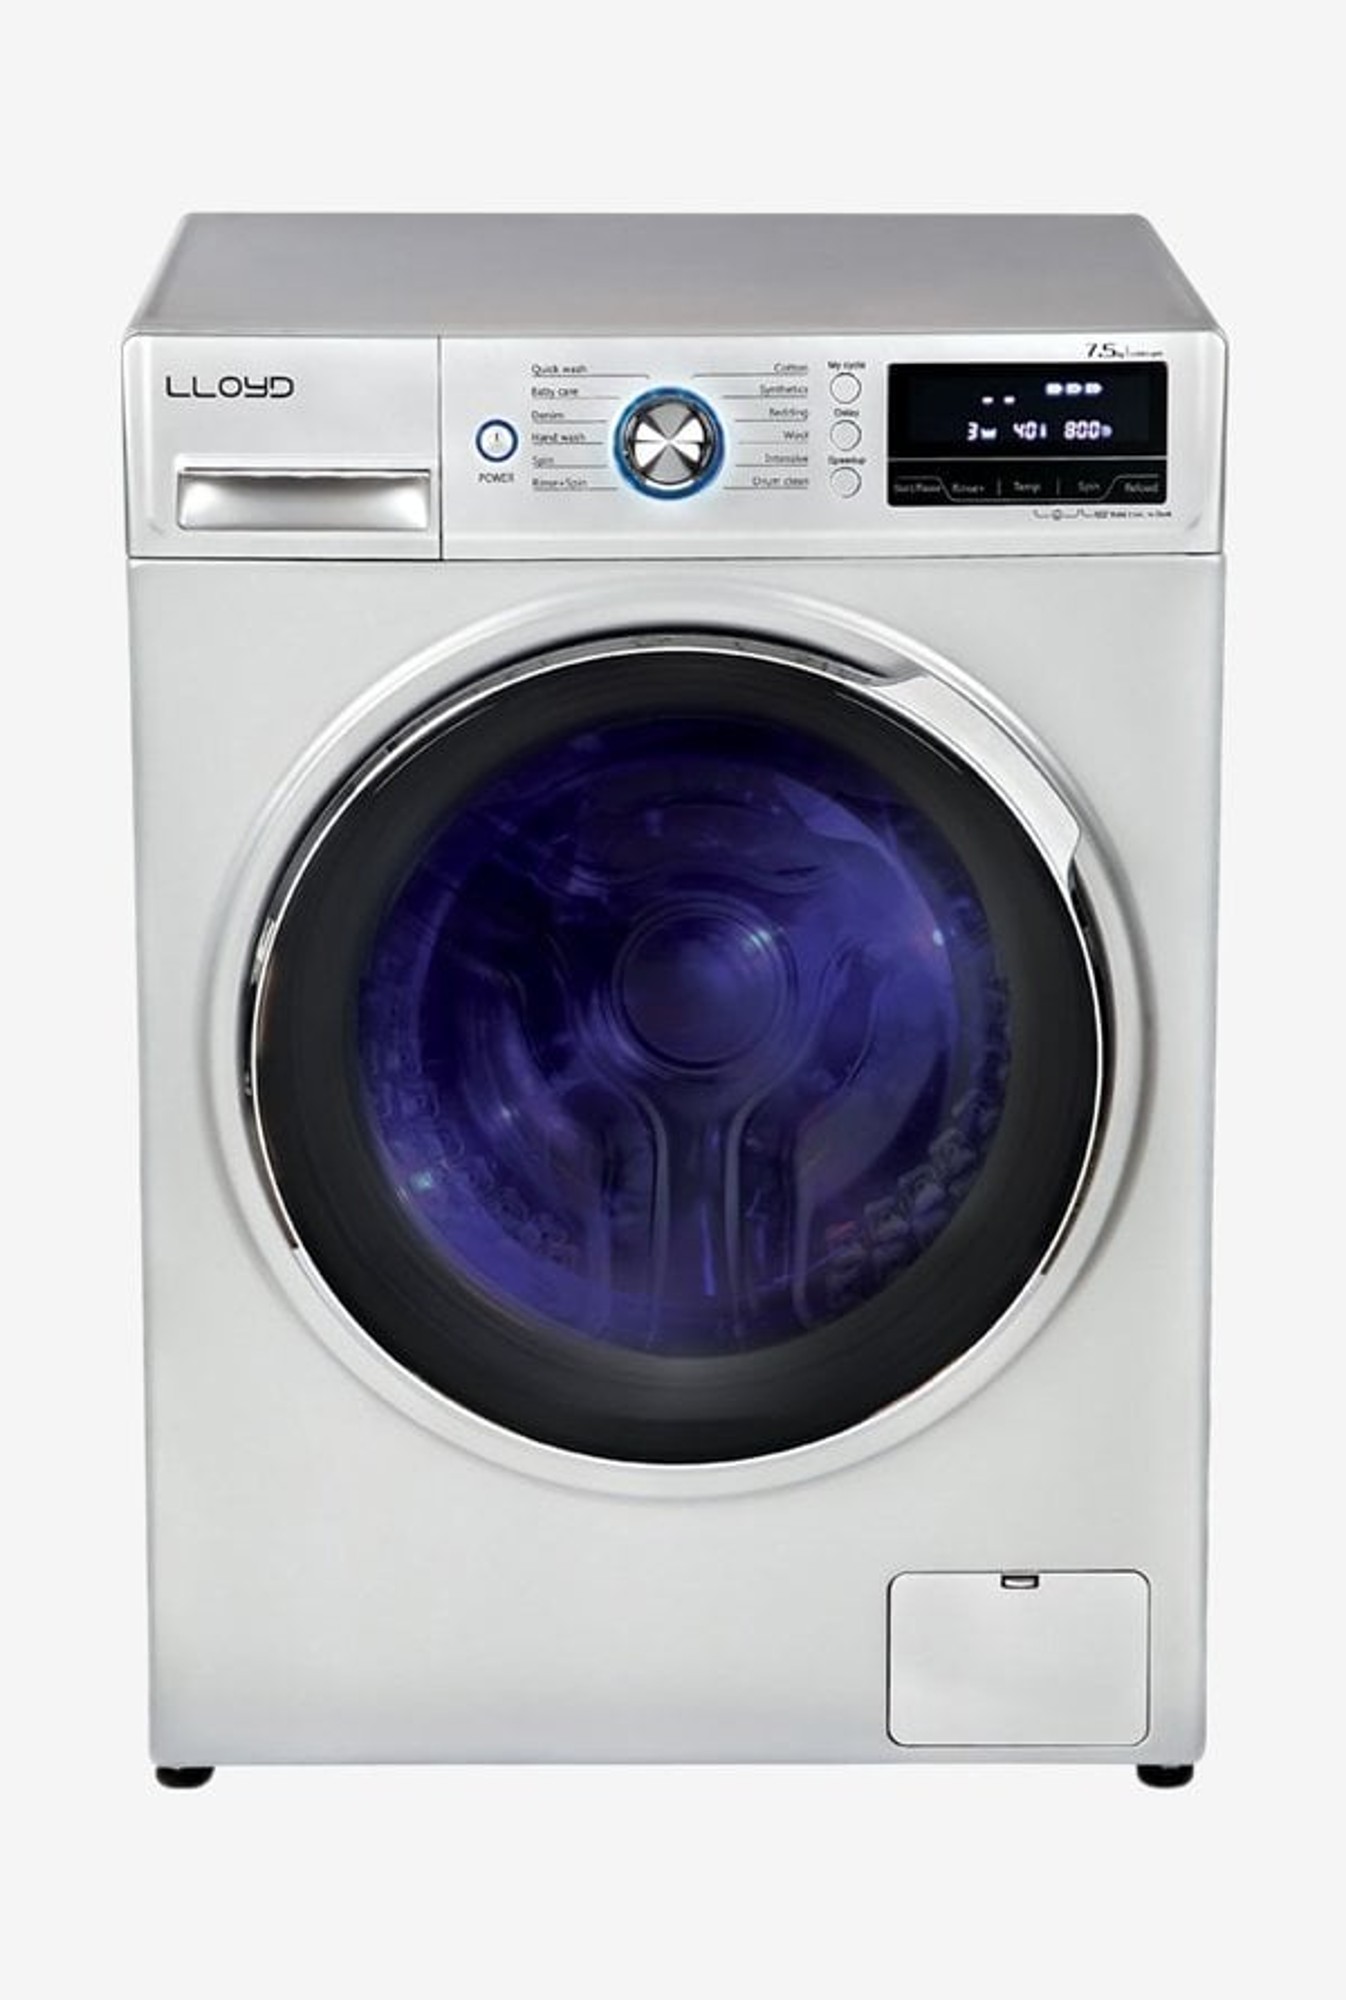 For 28728/-(15% Off) Lloyd LWMF75S 7.5 Kg Automatic Front Load Washing Machine (Silver) at TATA CLiQ